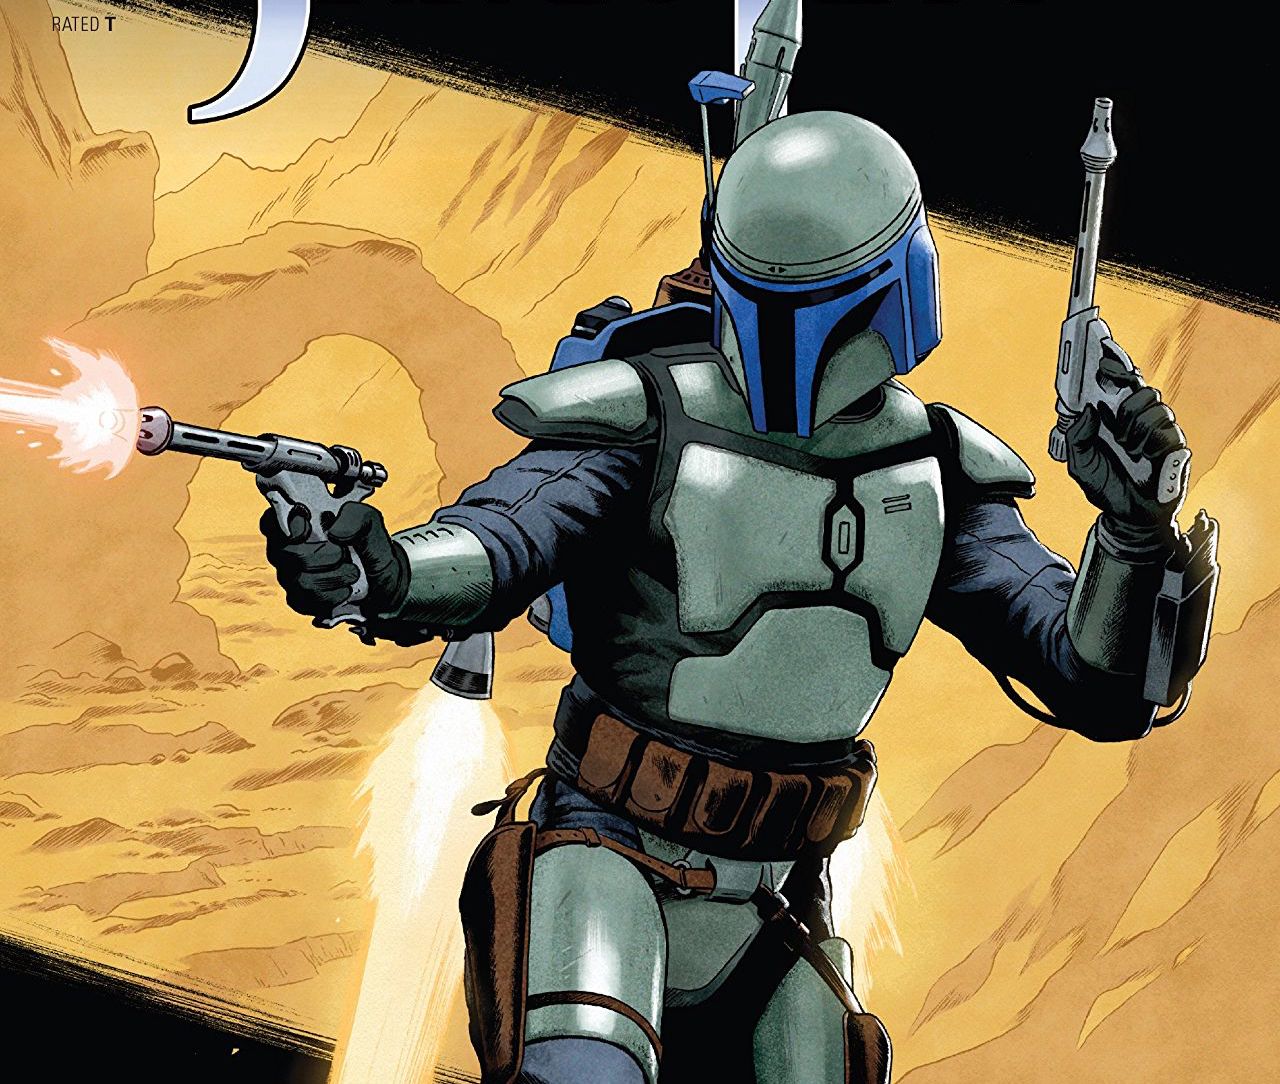 Star Wars: Age of Republic: Jango Fett #1 review: A surprisingly fresh look at a familiar character